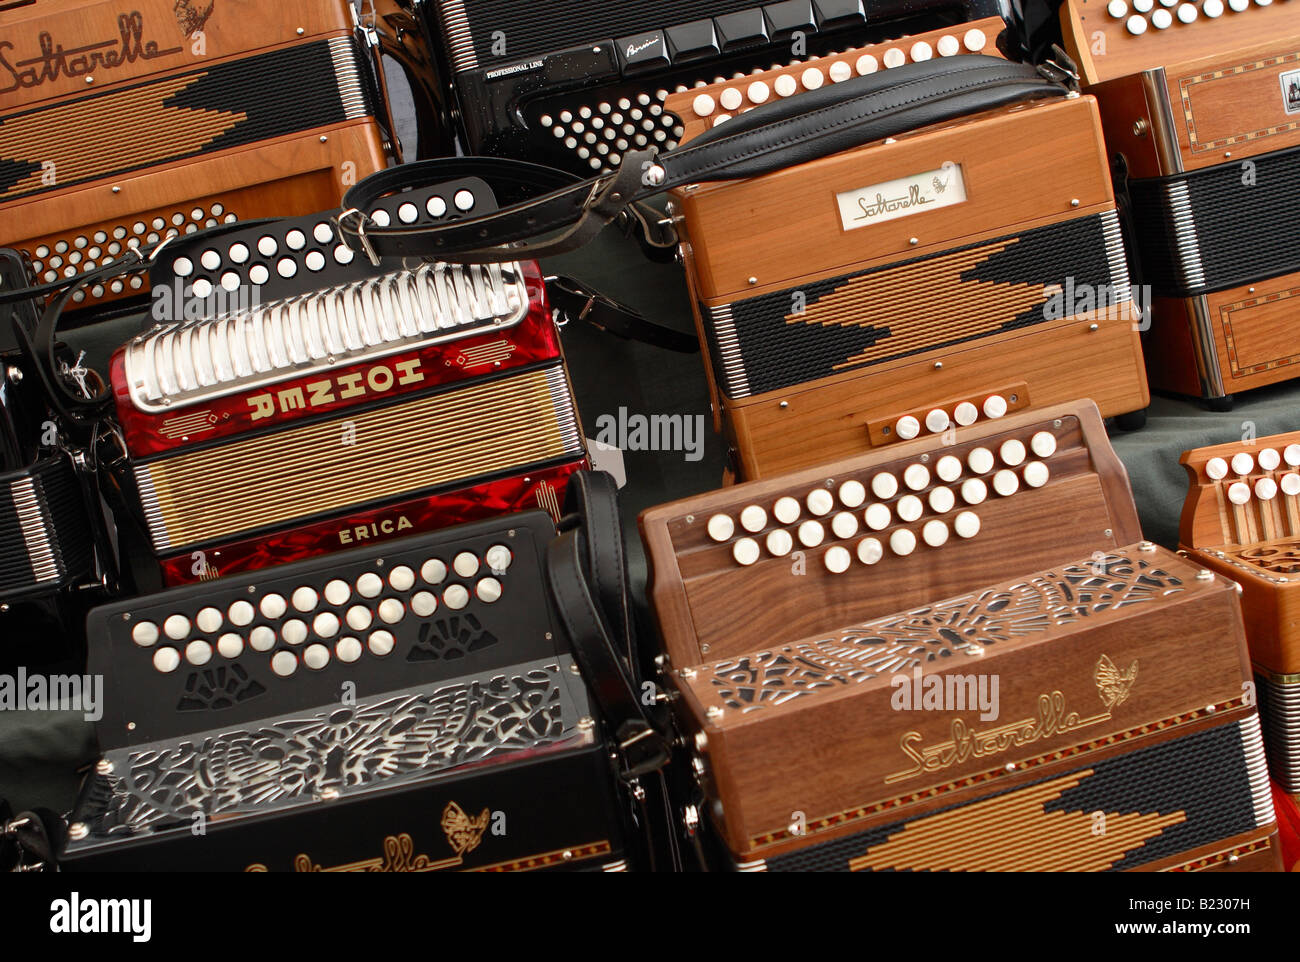 A selection of button accordion melodeon squeezebox musical instruments Stock Photo